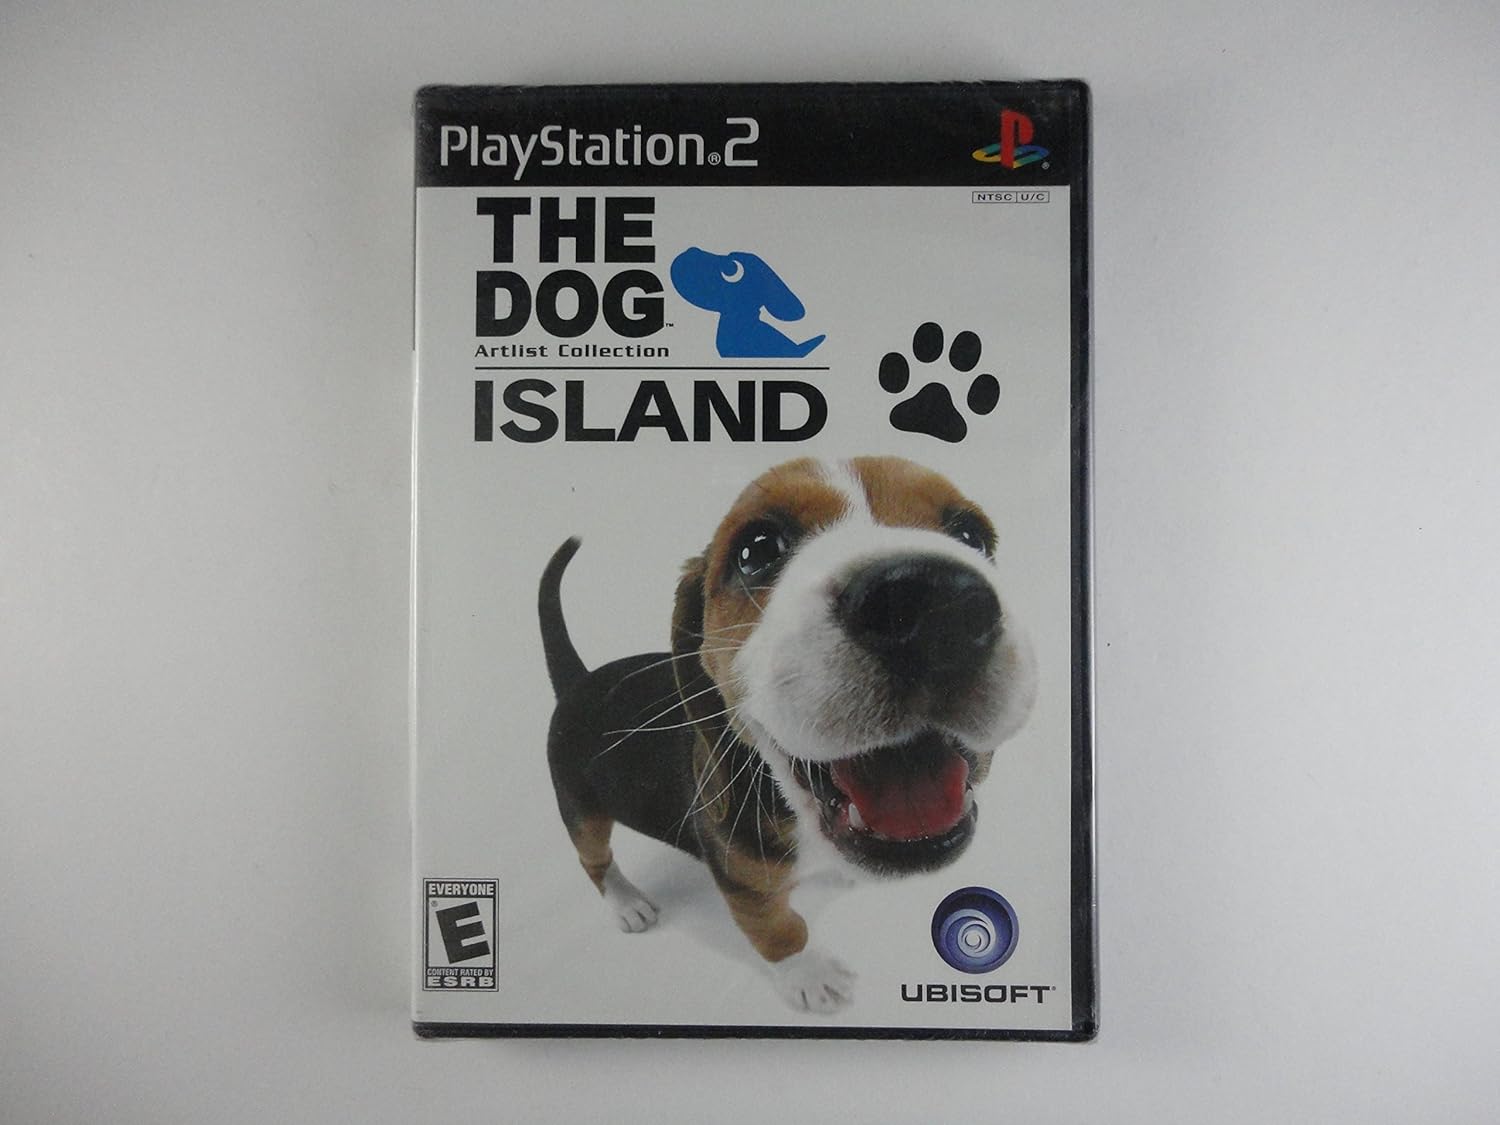 The Dog Island: Artist Collection